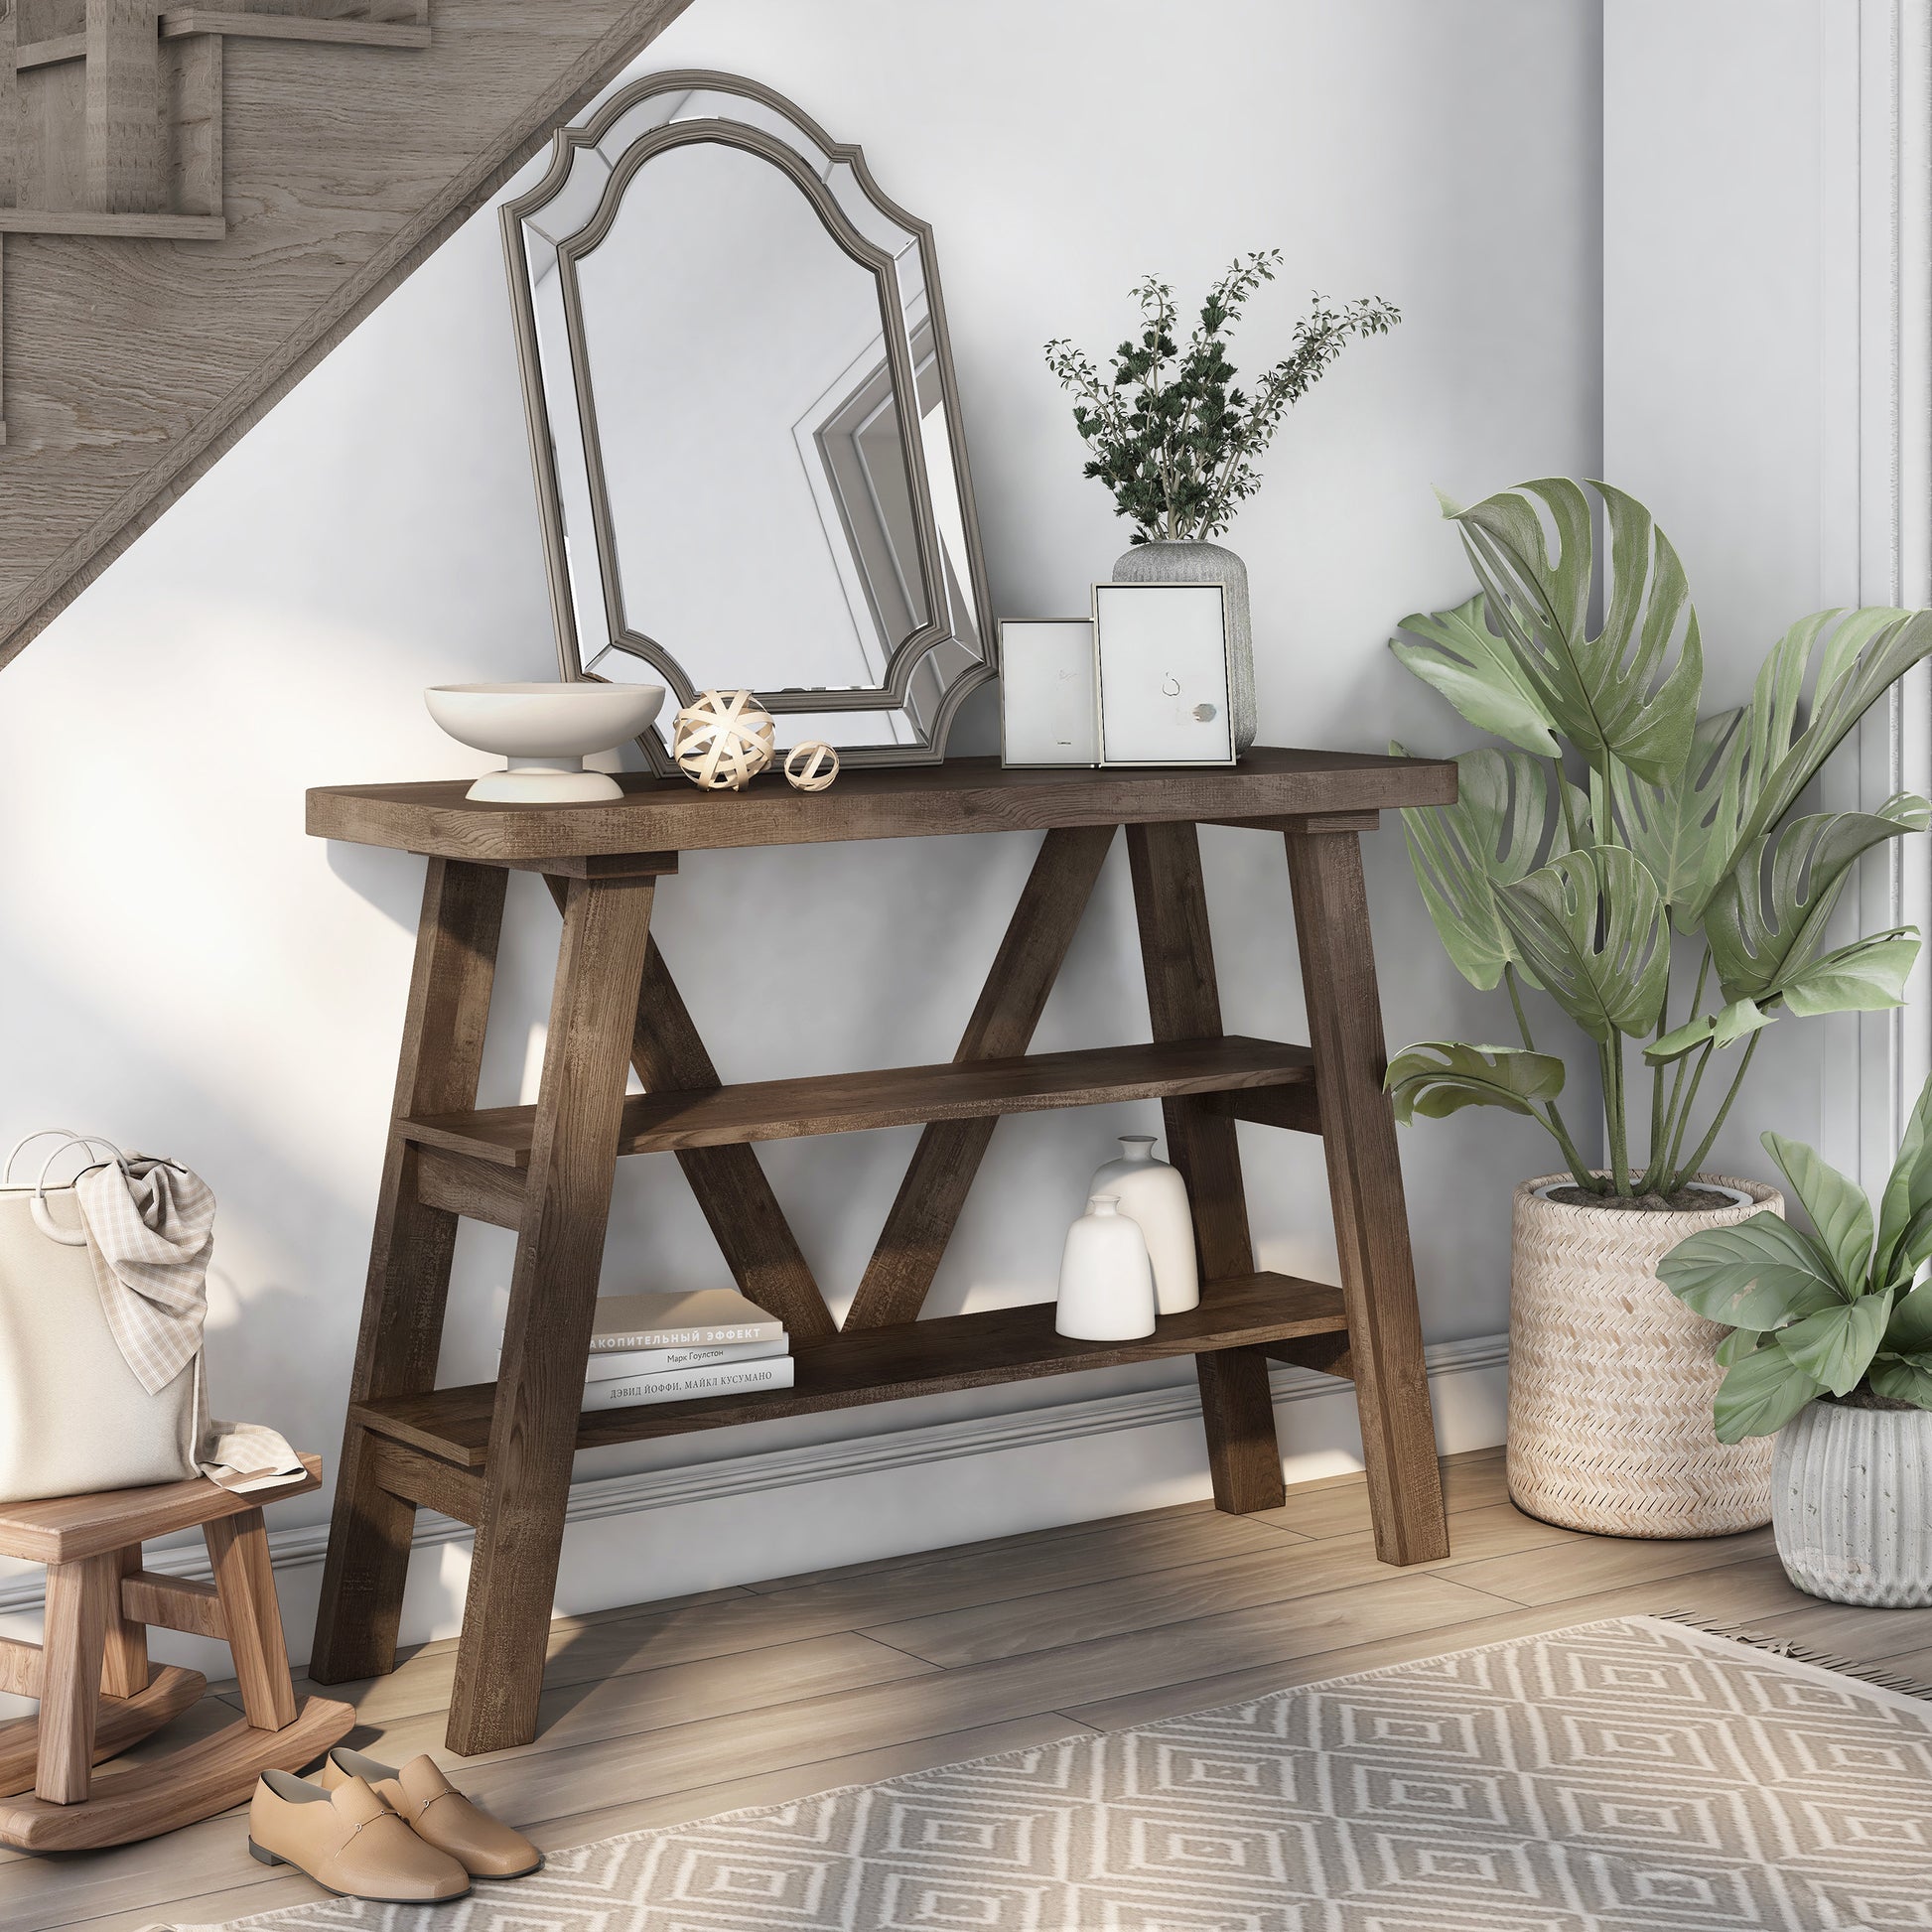 Right angled farmhouse reclaimed oak two-shelf console table in a living area with accessories